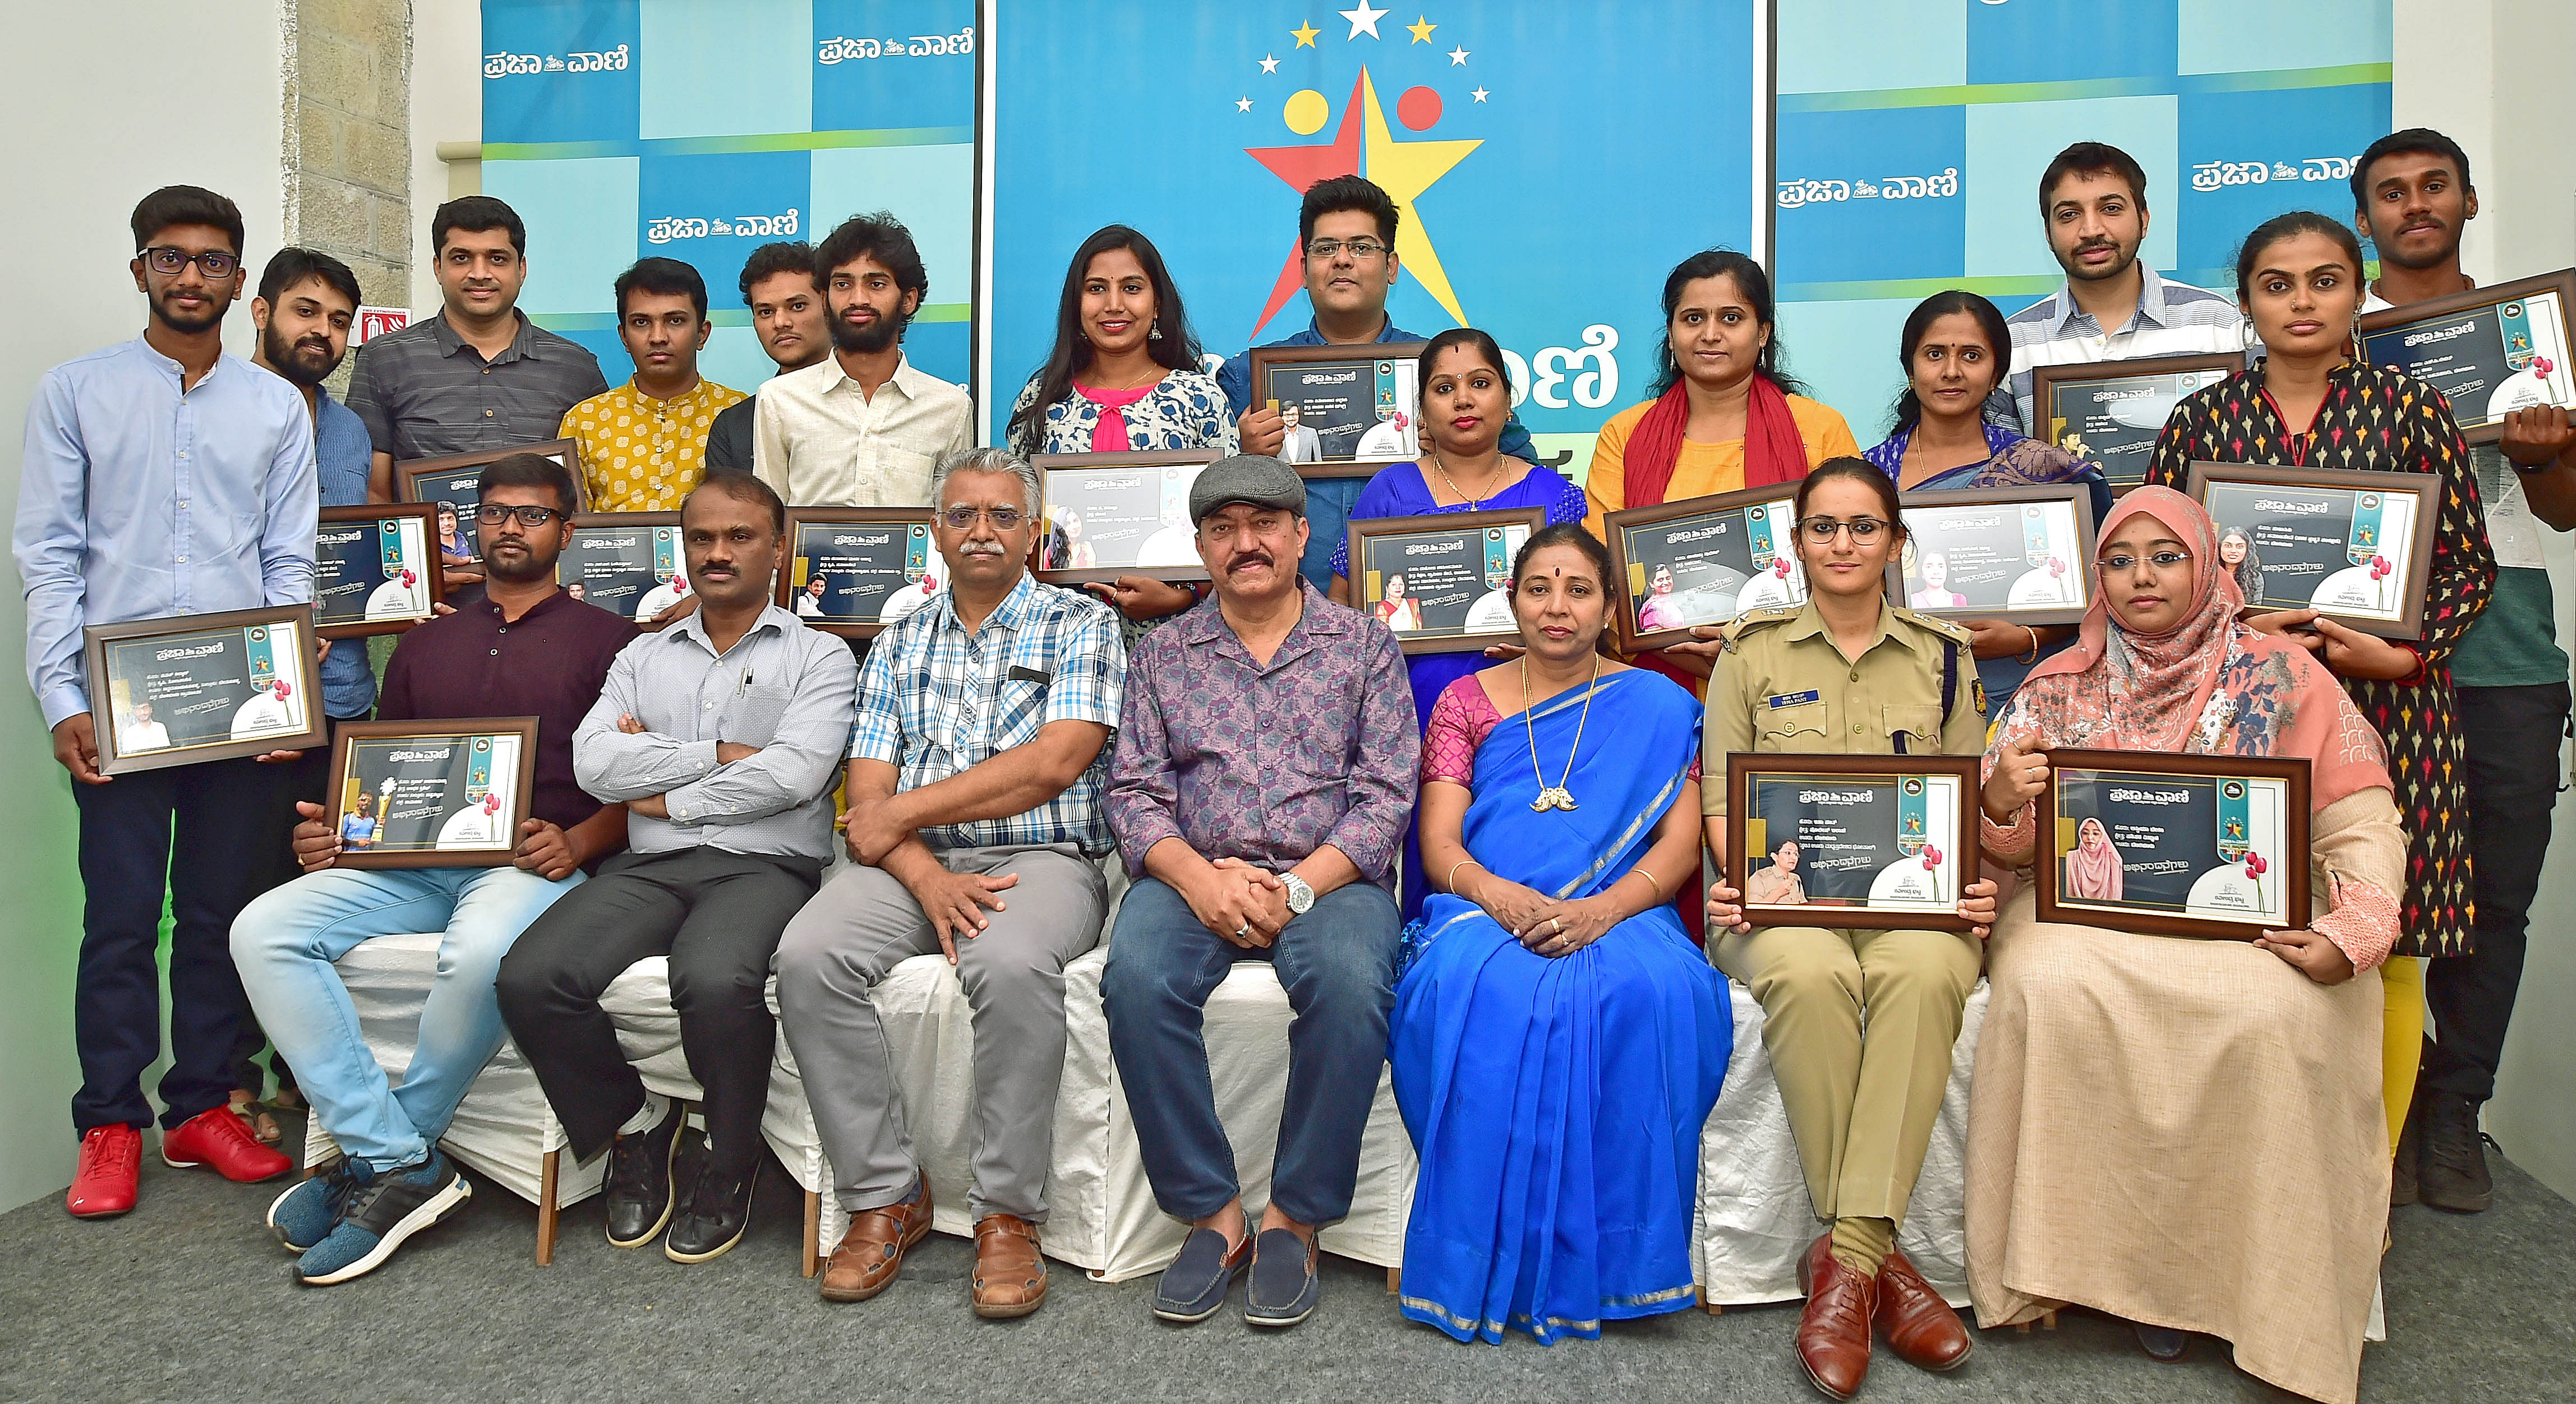 Prajavani and Deccan Herald on Thursday felicitated 20 persons from across the state for their outstanding achievements.. (DH Photo)